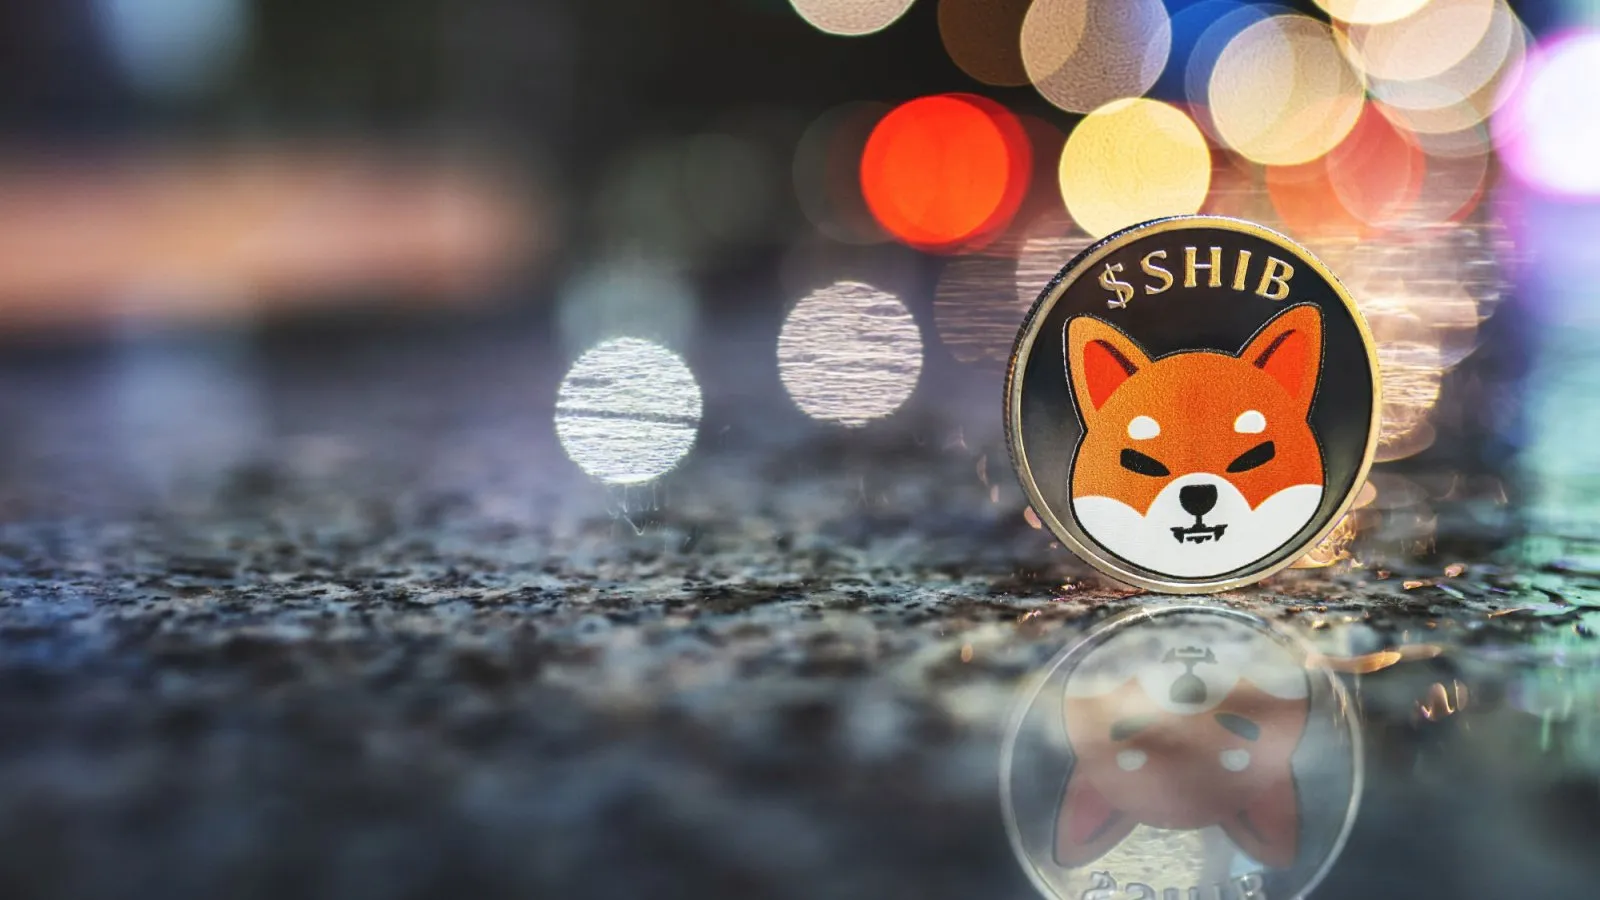 Shiba Inu (SHIB) is the second-largest meme coin by market cap. Image: Shutterstock